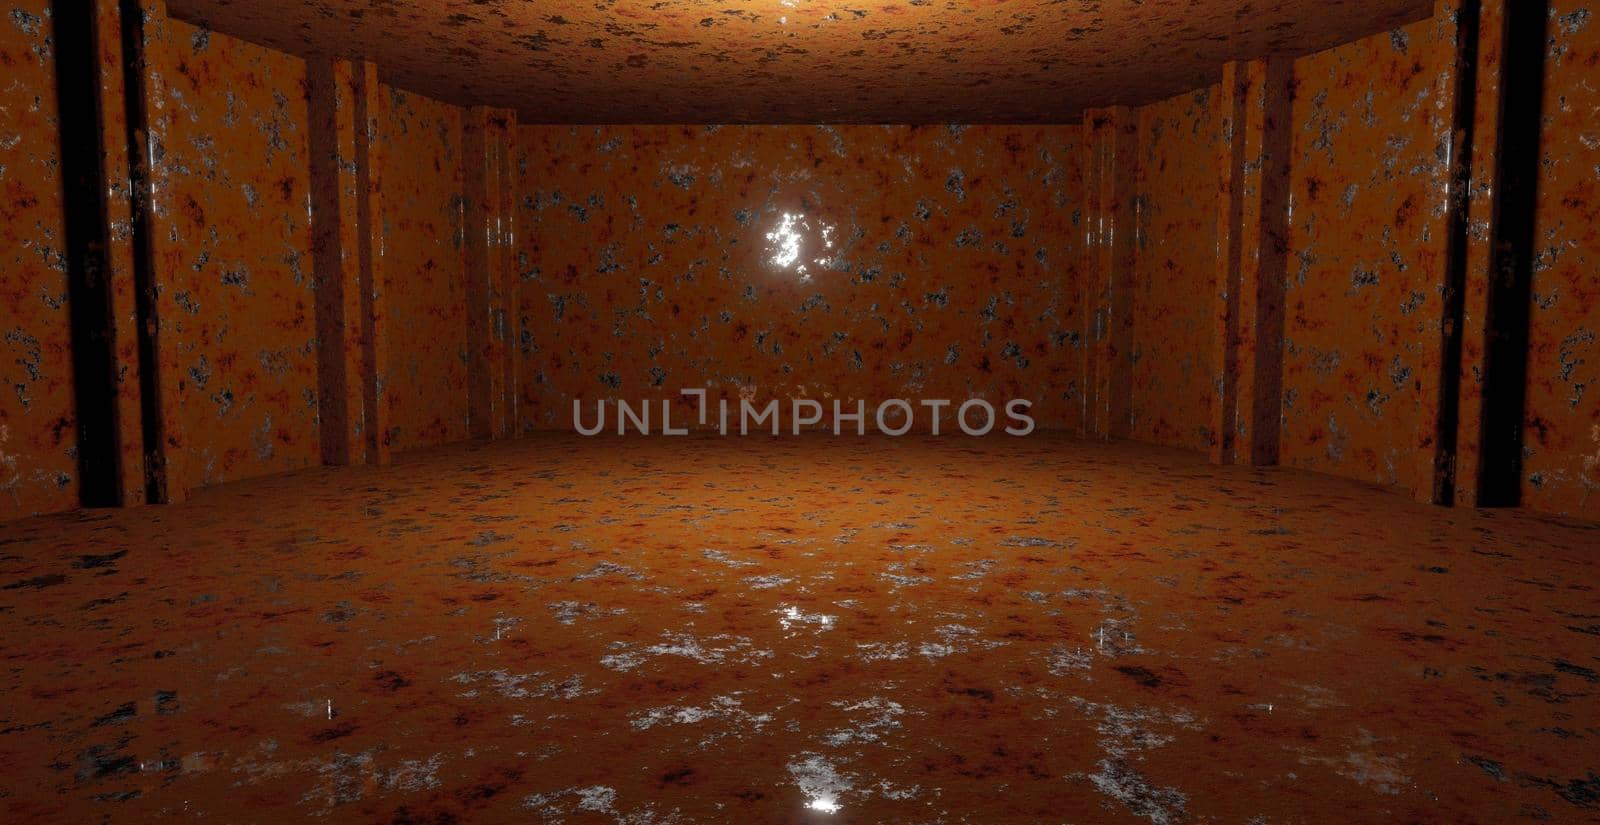 OuterSpace Empty Glowing Vibrant Laser Showcase Stage Corridor Hallway Entrance Spotlight Copper Brown or Yellow Abstract Background With Space For Products 3D Rendering